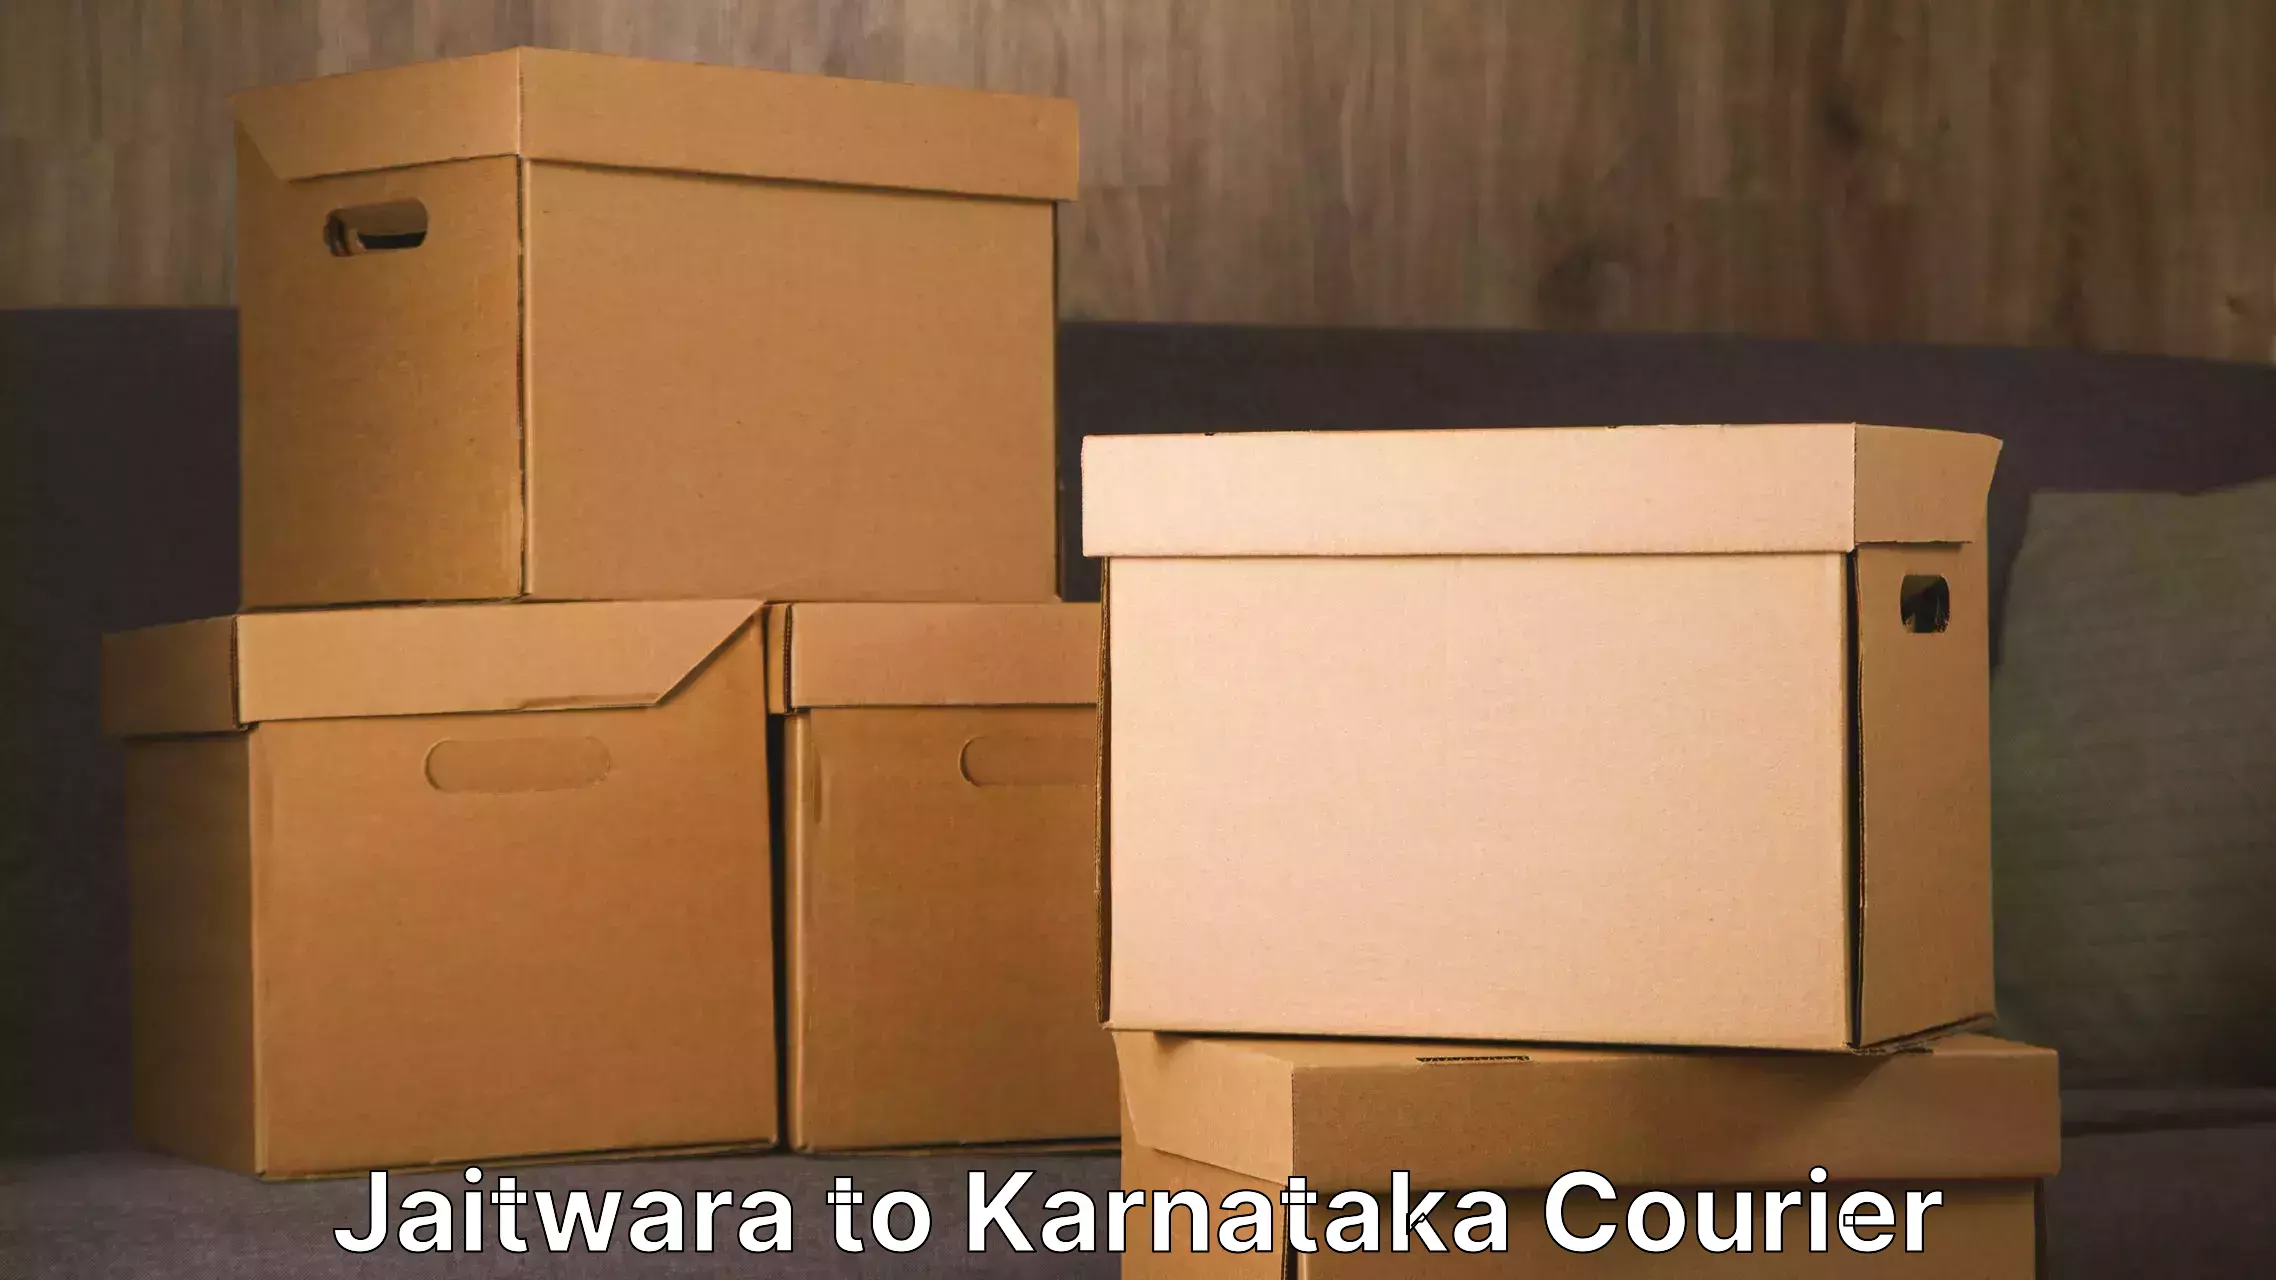 Trusted relocation experts Jaitwara to Channapatna